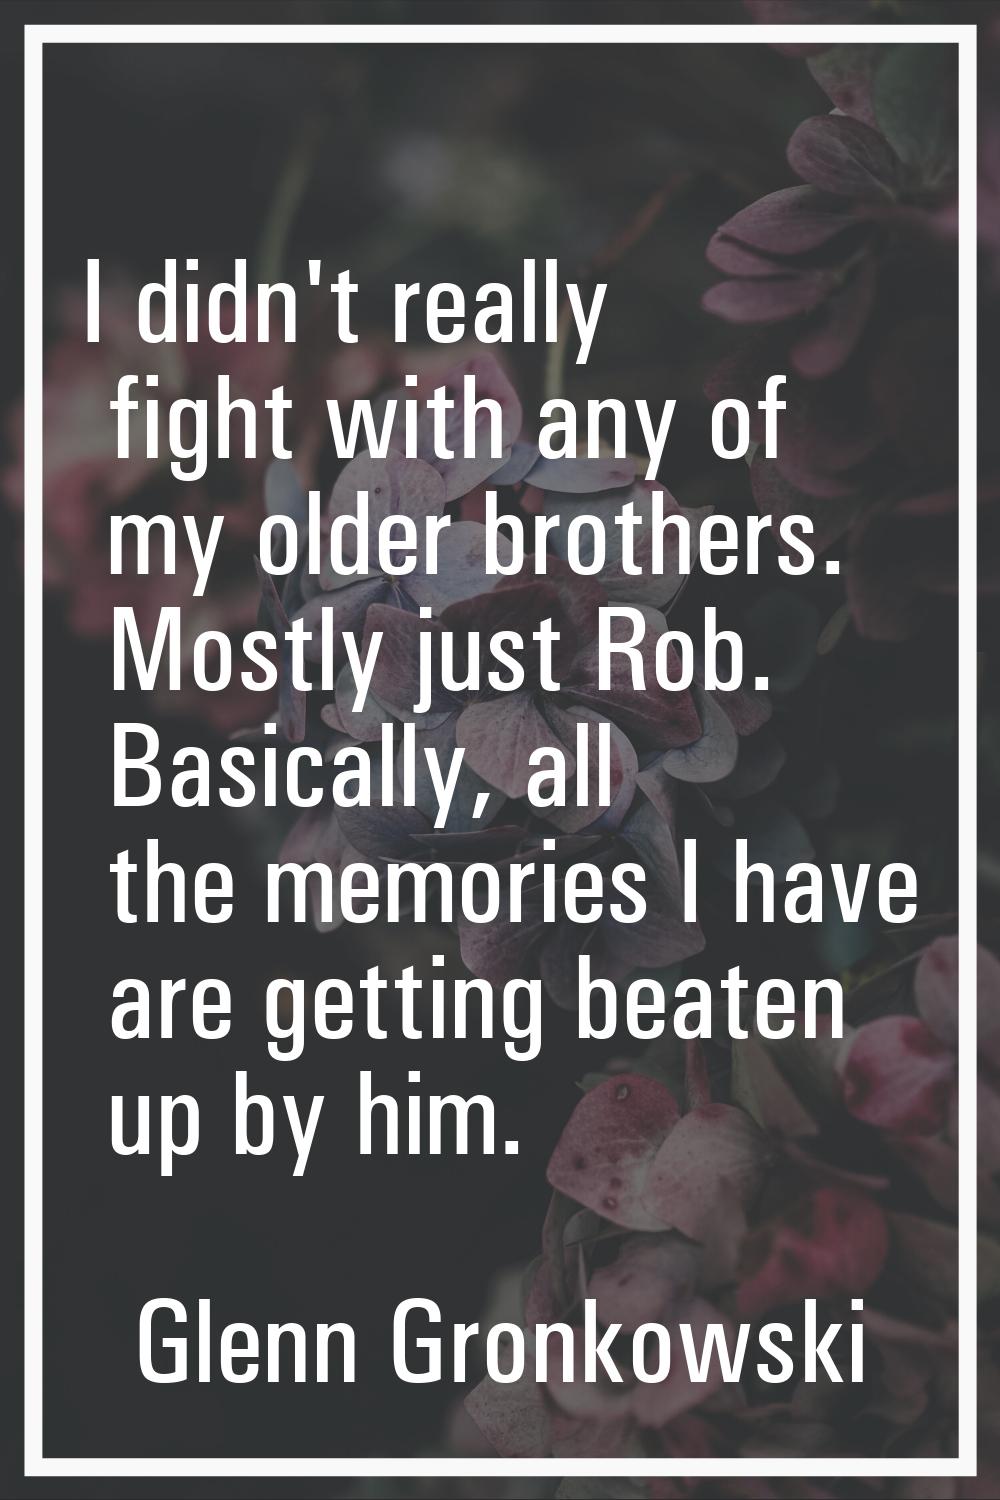 I didn't really fight with any of my older brothers. Mostly just Rob. Basically, all the memories I